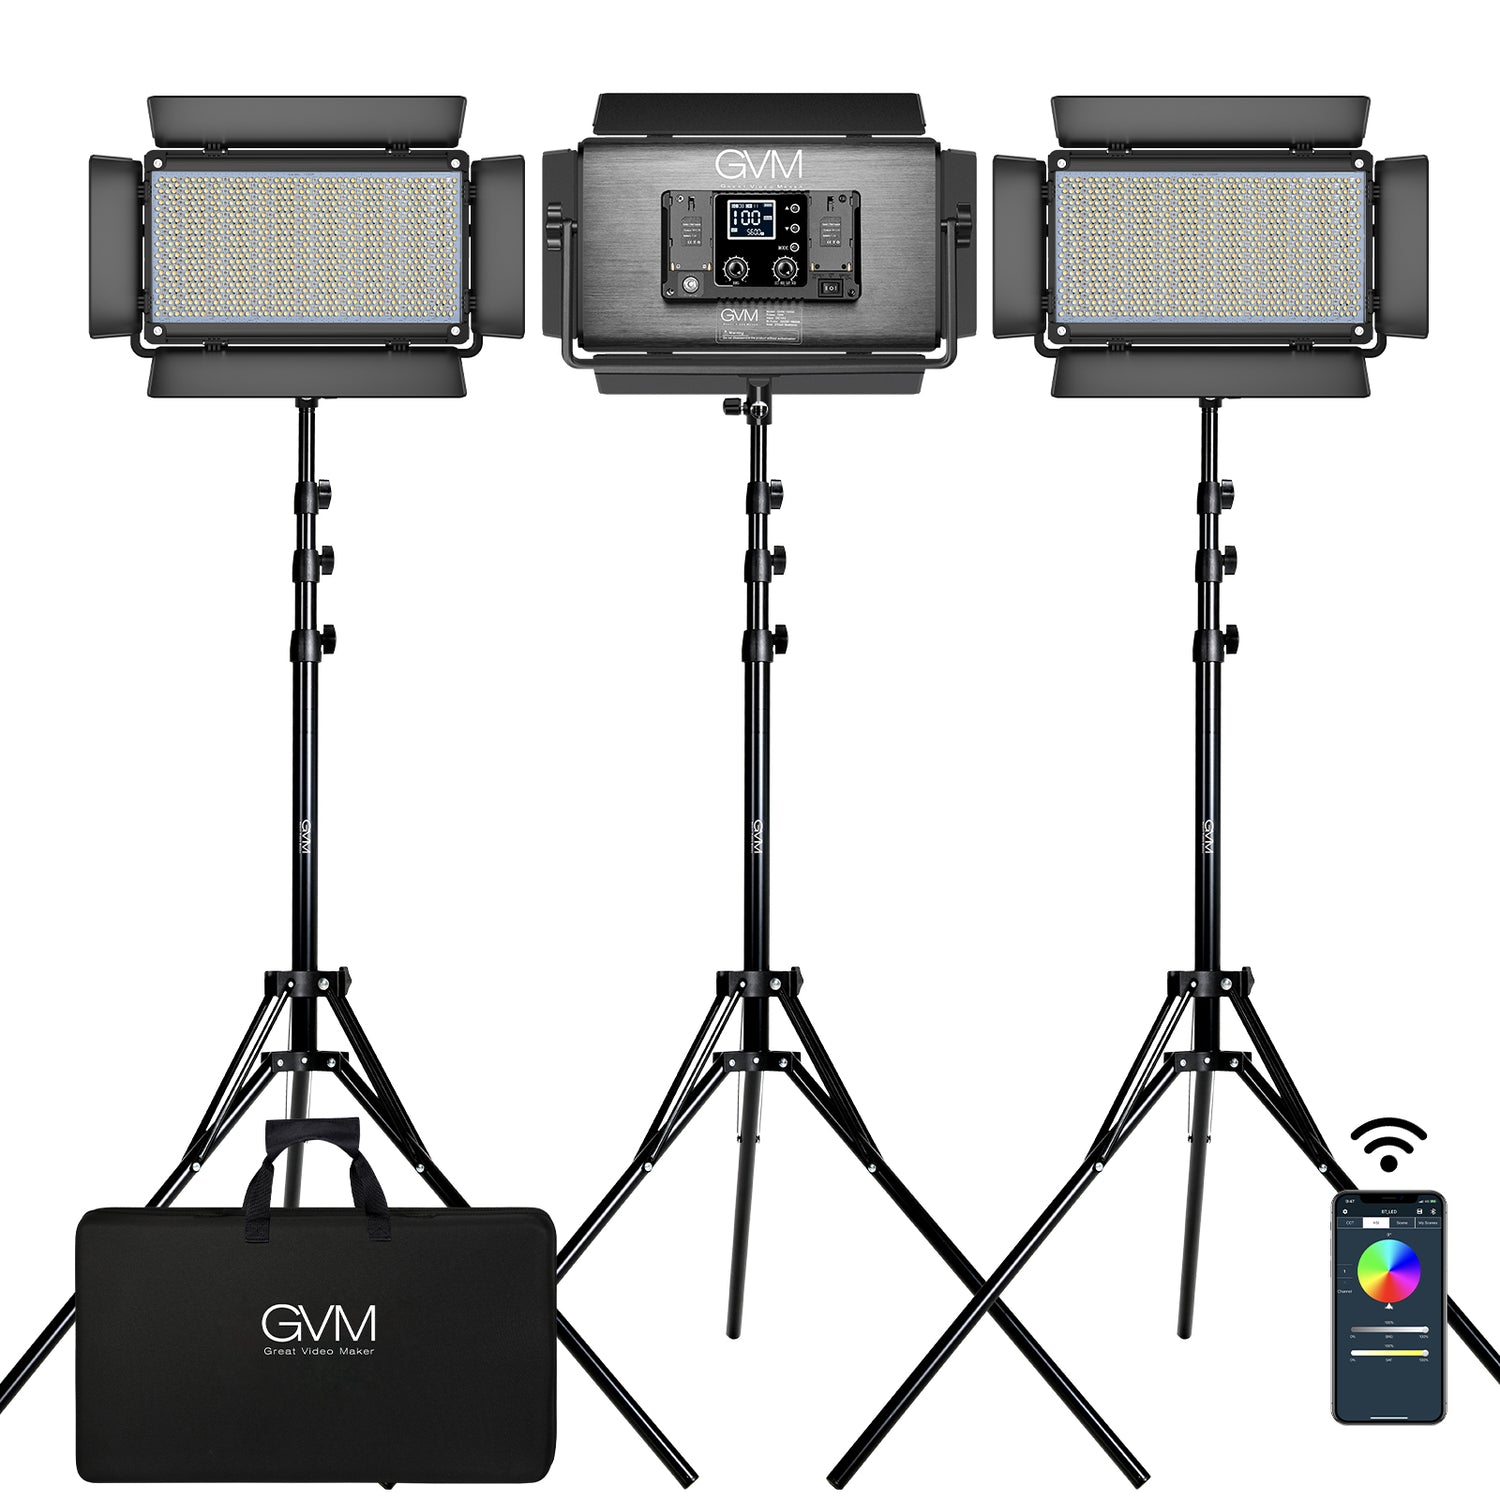 GVM-1500D 75W Powerful Bi-color and RGB Video Panel Light - GVMLED